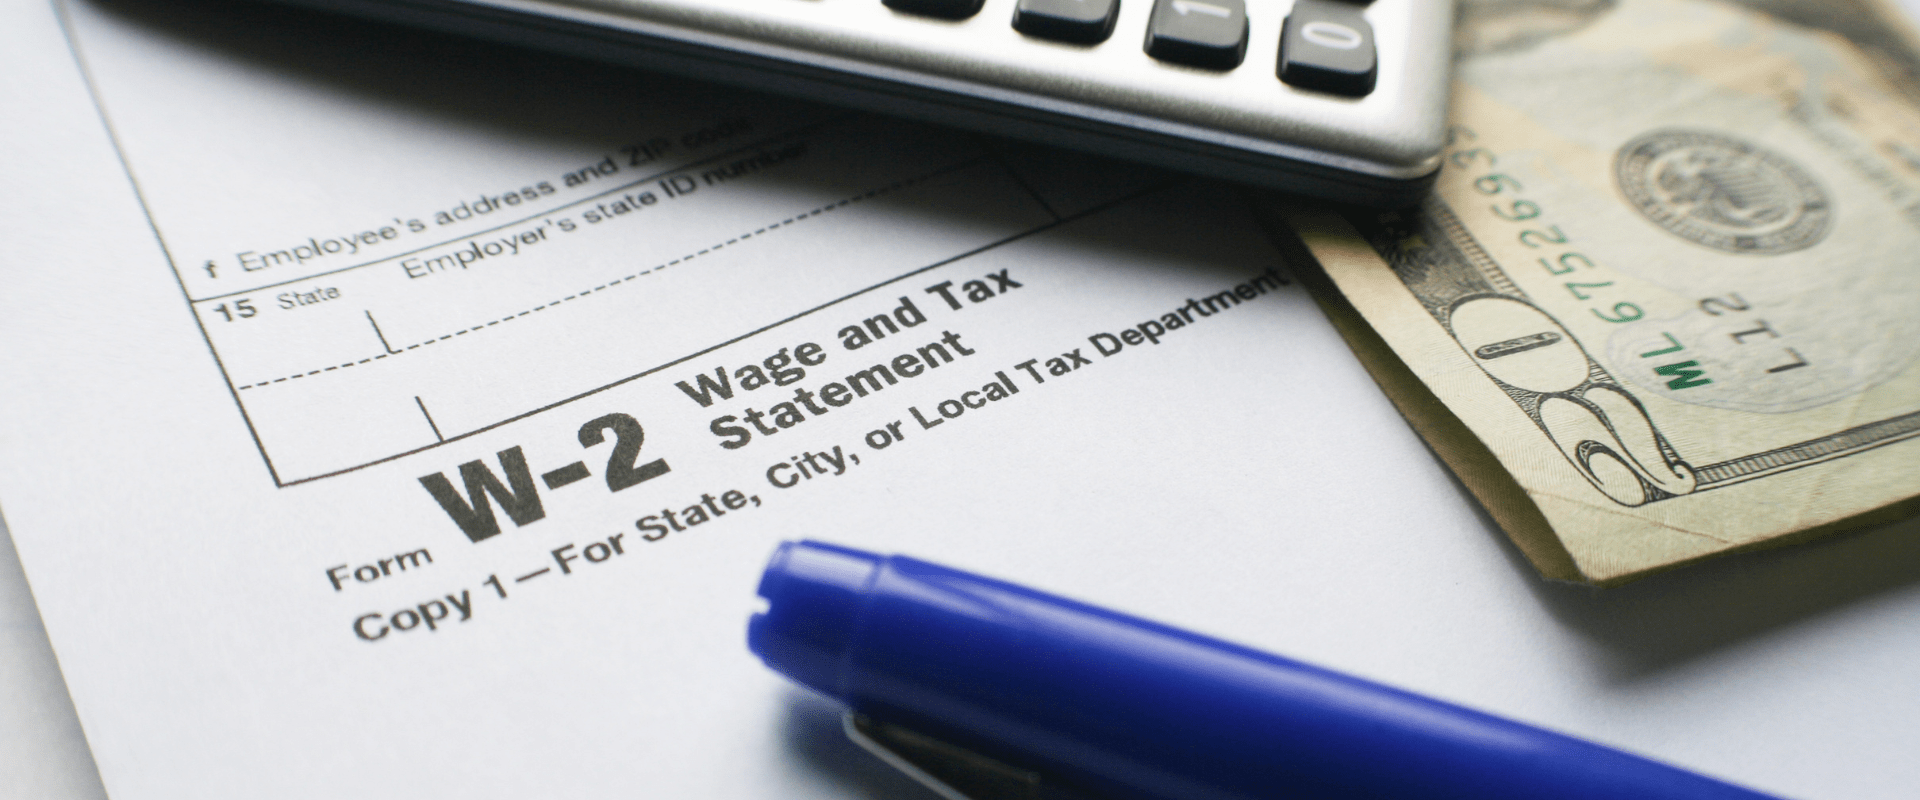 W-2 vs Last Pay Stub: What’s the Difference?